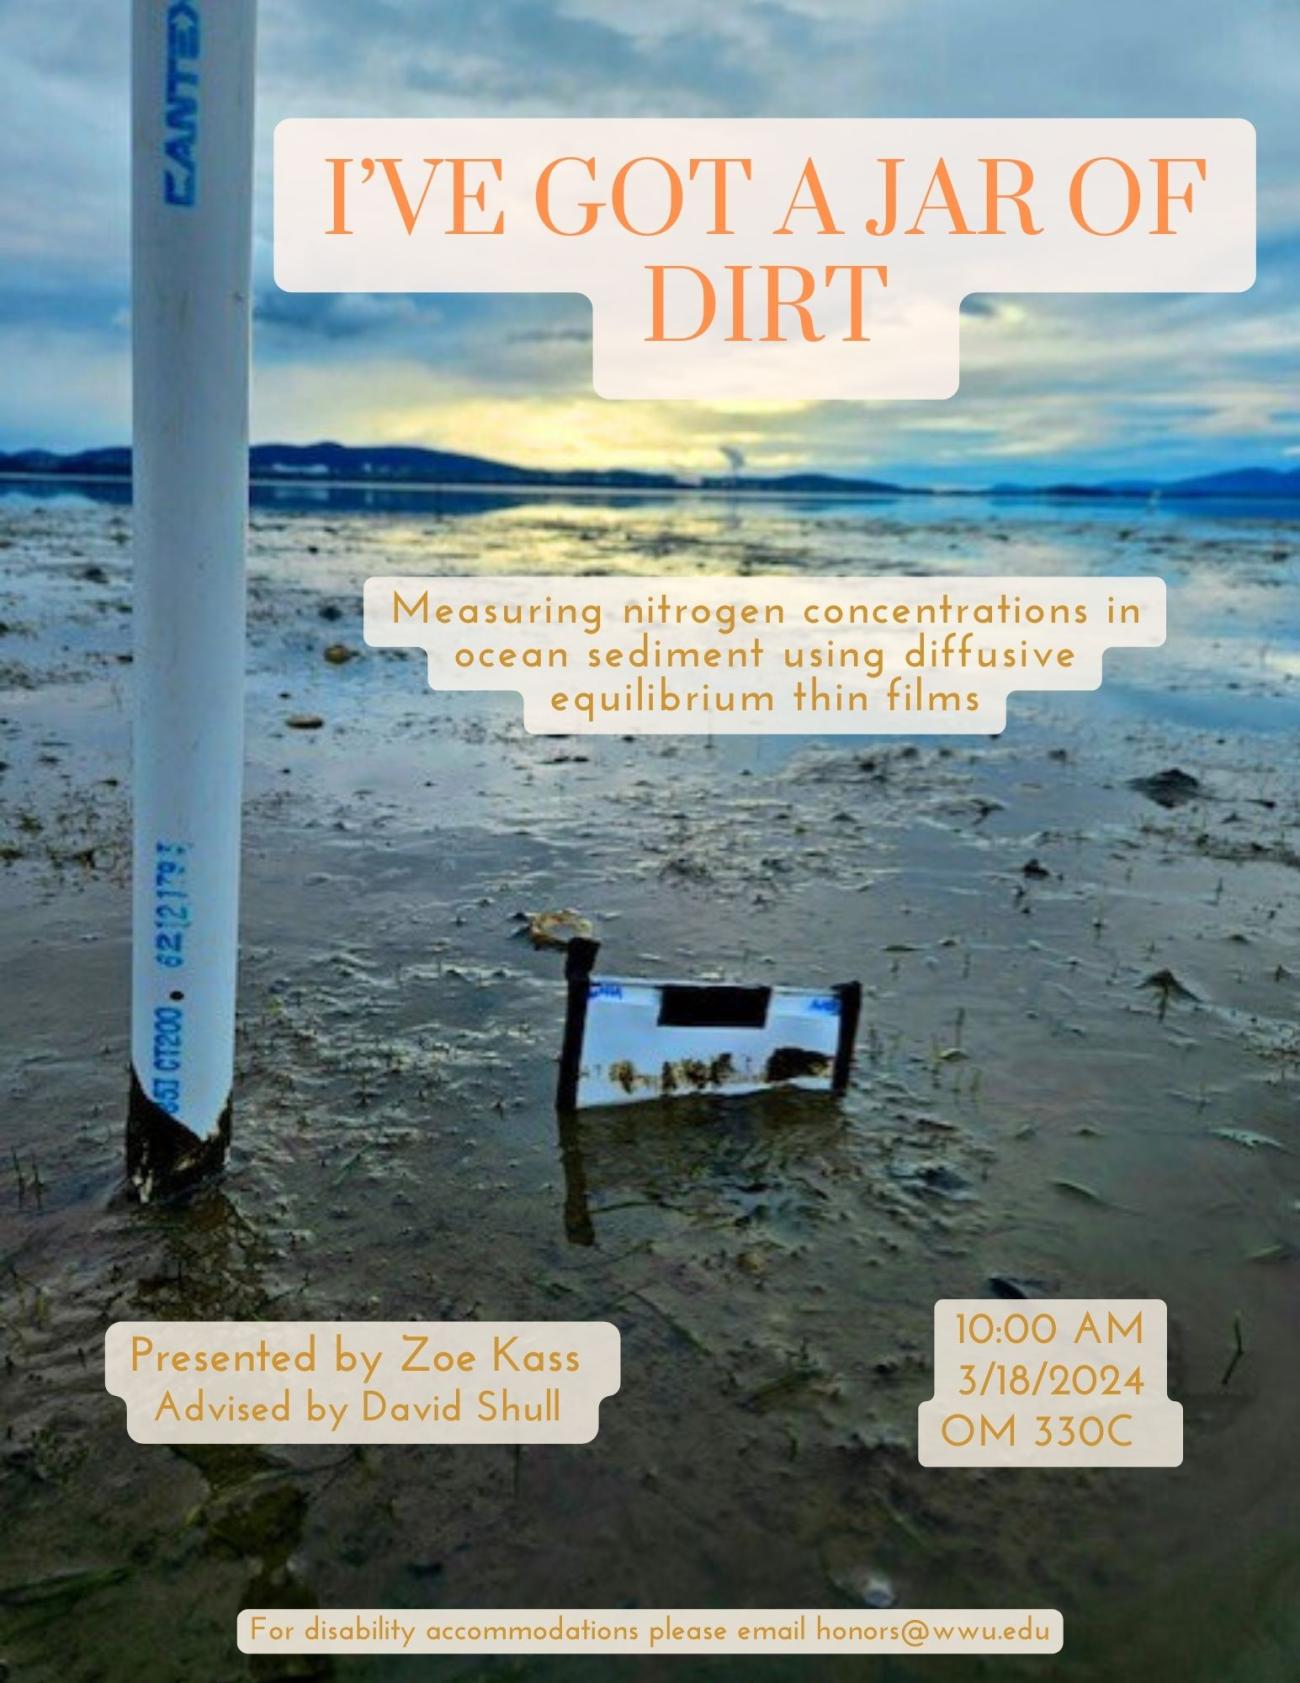 A photograph background shows a mudflat at sunset. A tall piece of plastic tubing and a small plastic rectangle stick out from the mud. Text reads "I've got a jar of dirt. Measuring nitrogen concentrations in ocean sediment using diffusive equilibrium thin films. Presented by Zoe Kass. Advised by David Shull. 10:00 AM. 3/18/2024. OM 330C. For disability accommodations please email honors@wwu.edu."